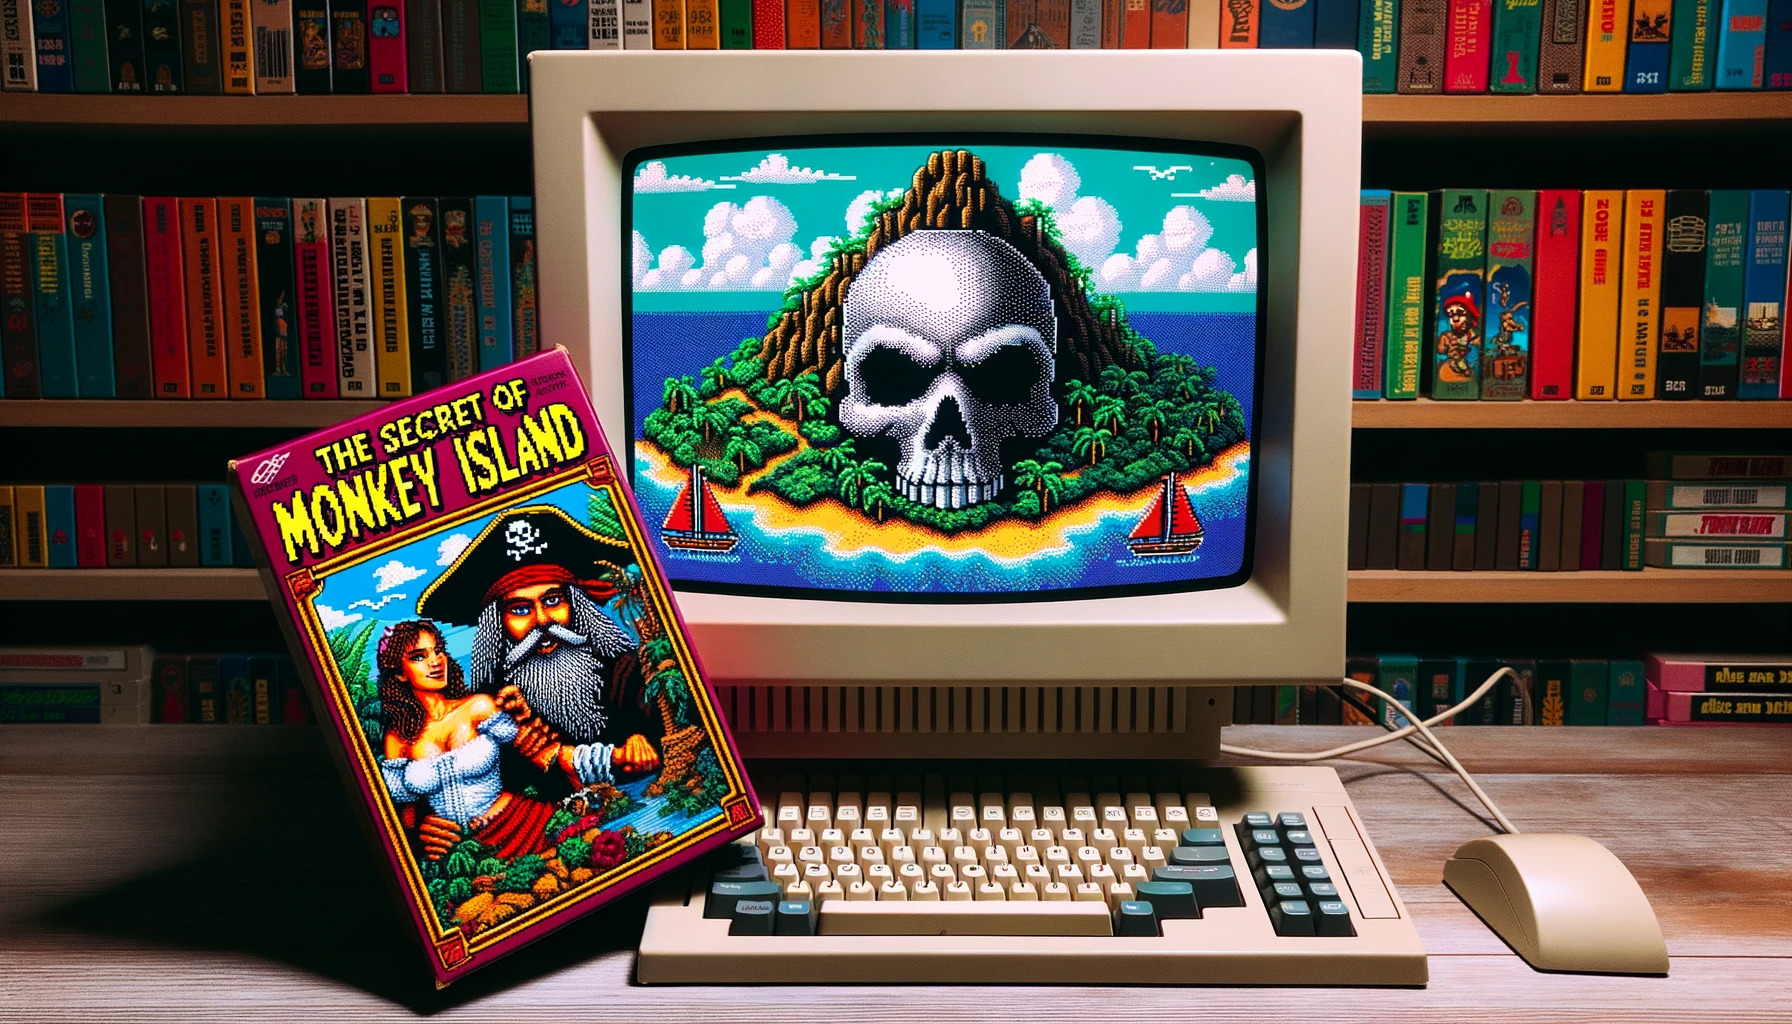 Photo of a vintage computer monitor displaying pixelated graphics of a Caribbean island with a skull-shaped mountain. Next to the monitor, a classic g